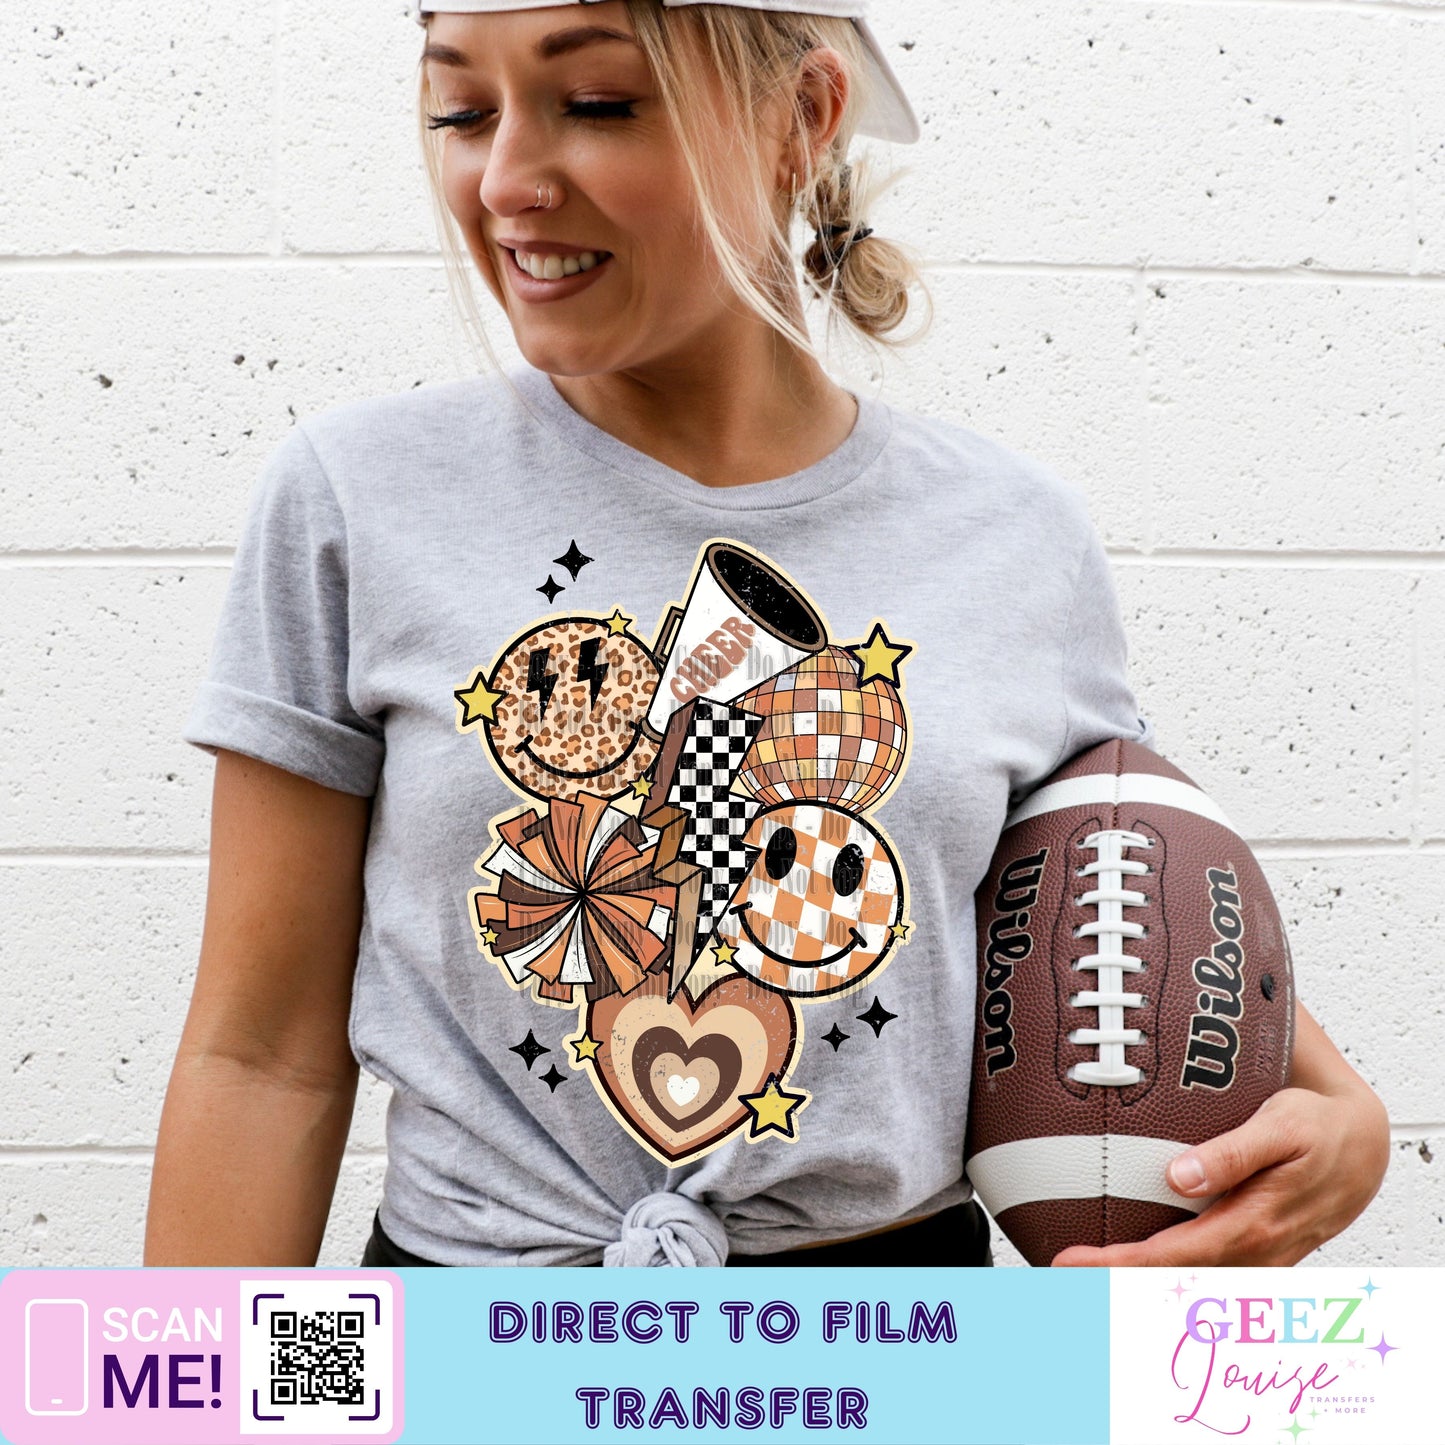 Retro cheer - Direct to Film Transfer - made to order